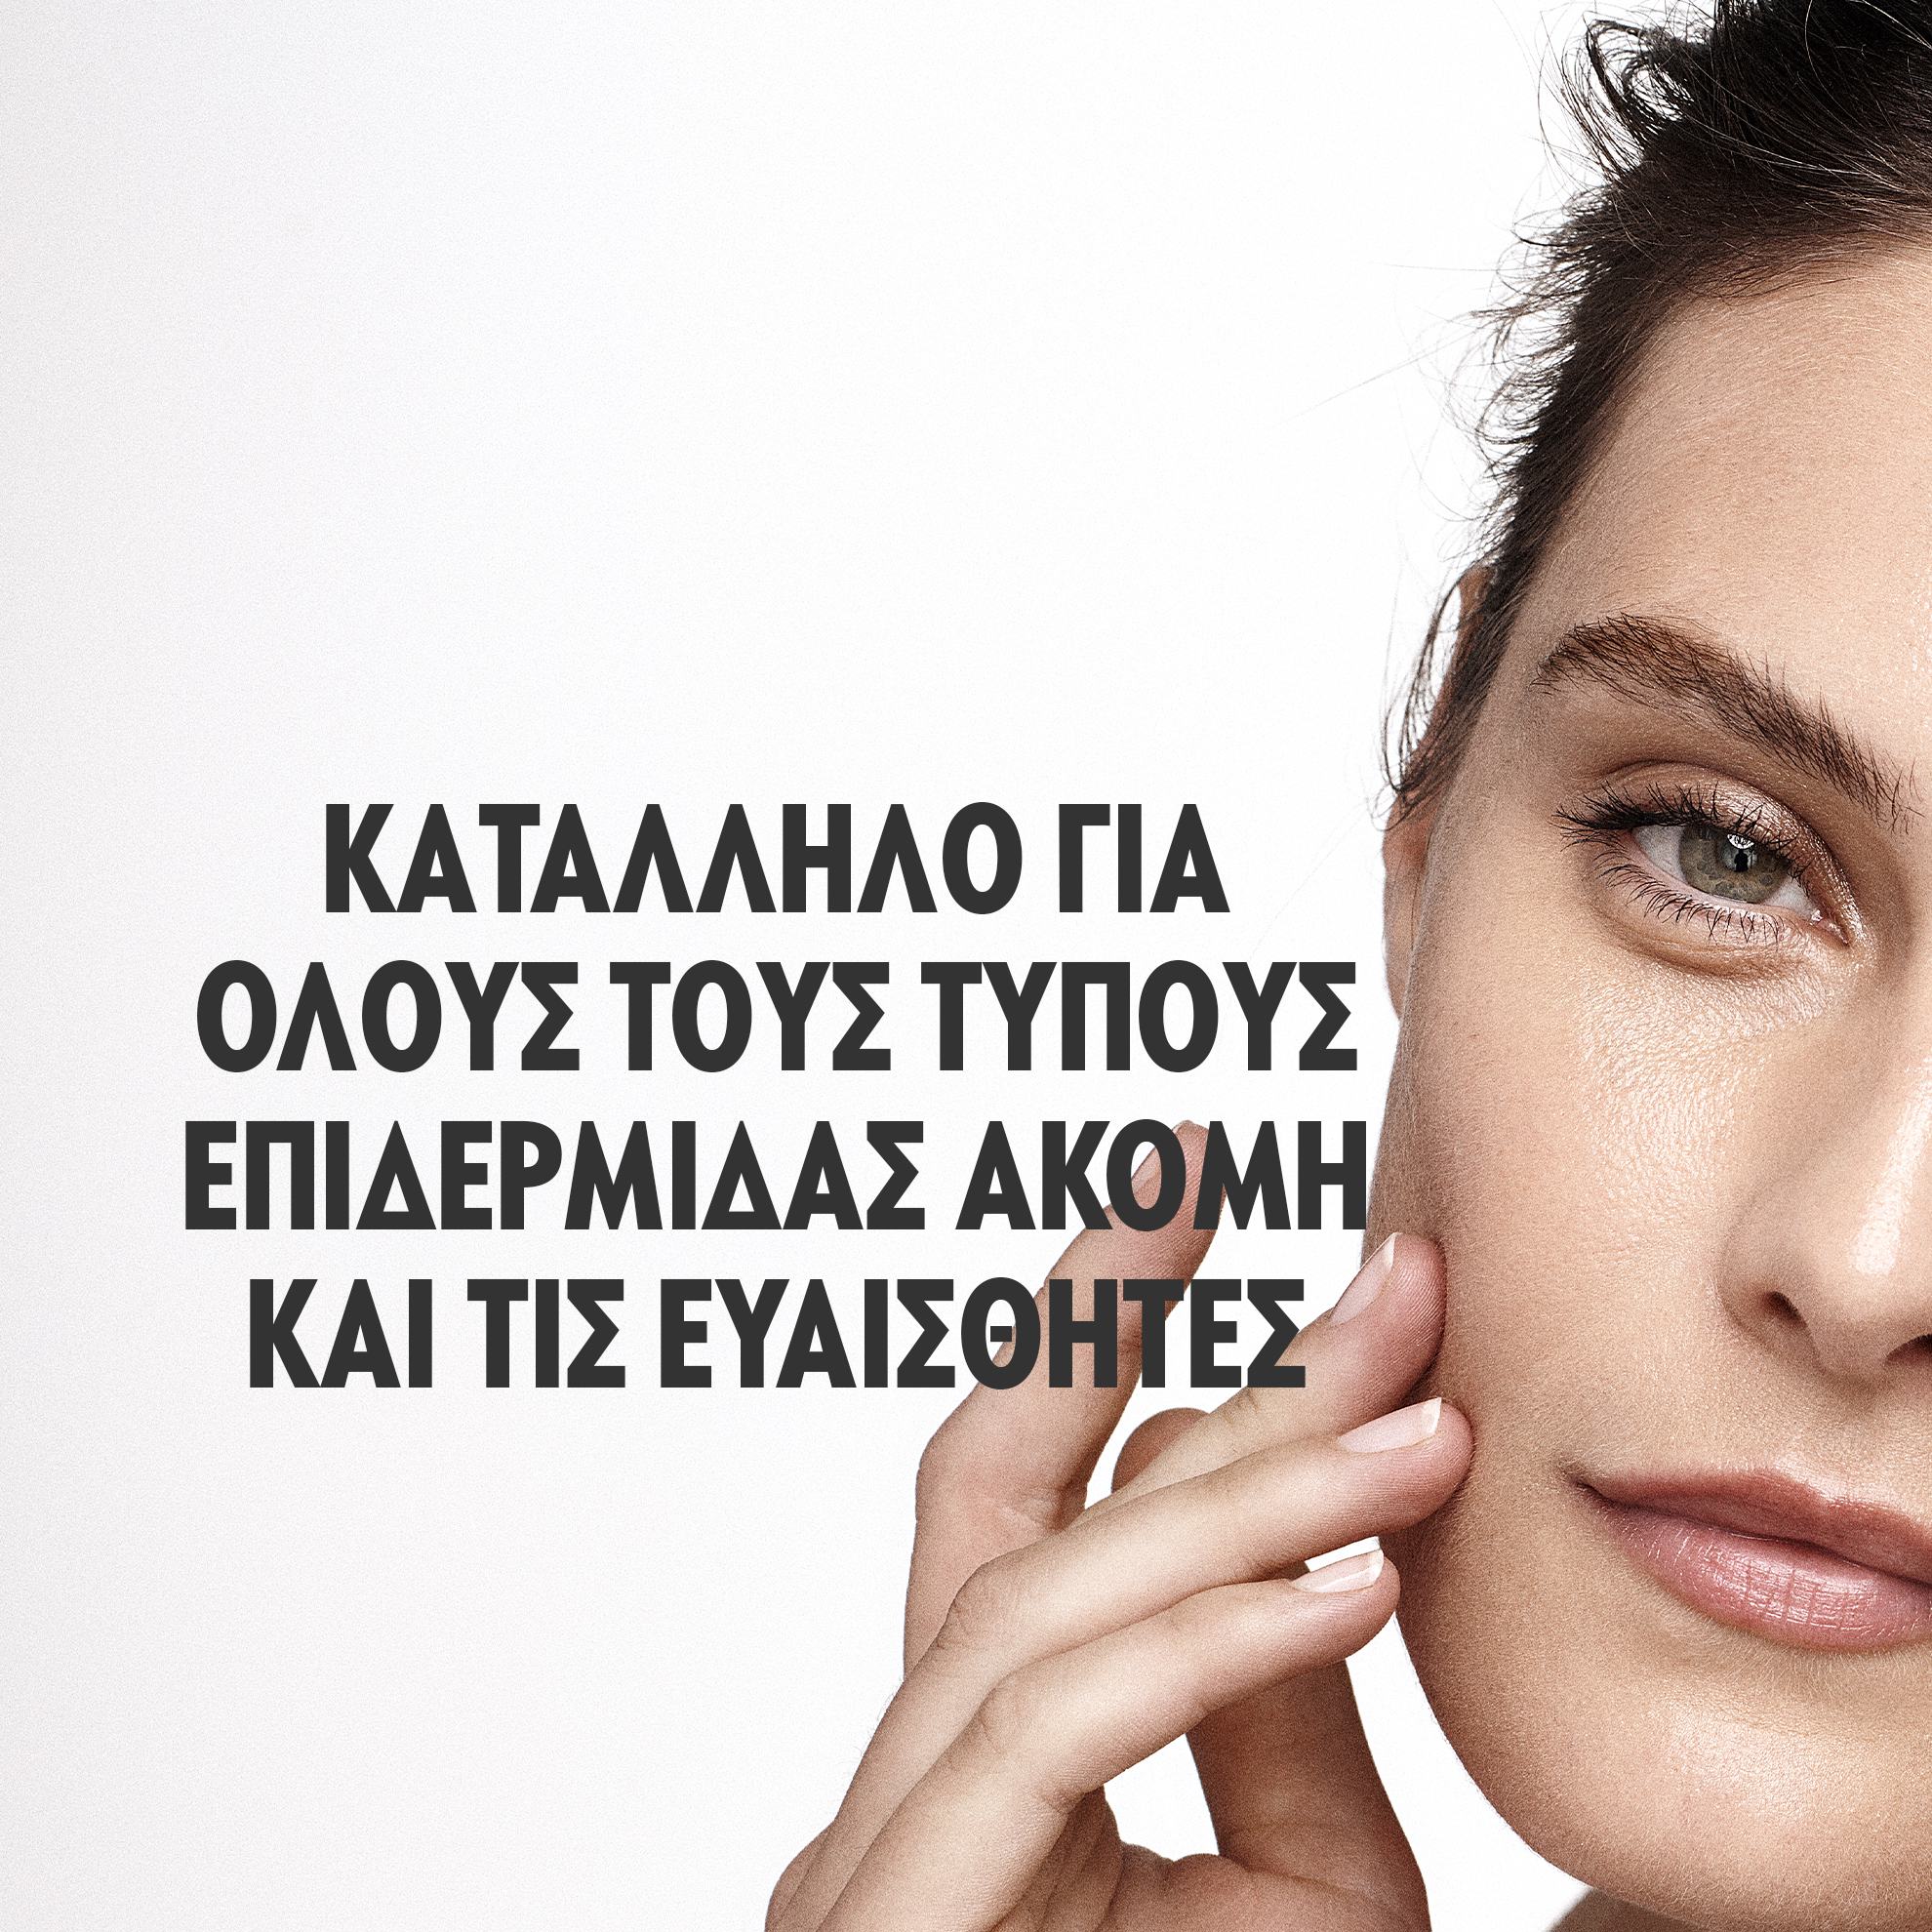 https://media-cdn.oriflame.com/productImage?externalMediaId=product-management-media%2fProducts%2f44387%2fGR%2f44387_6.png&id=16431500&version=1